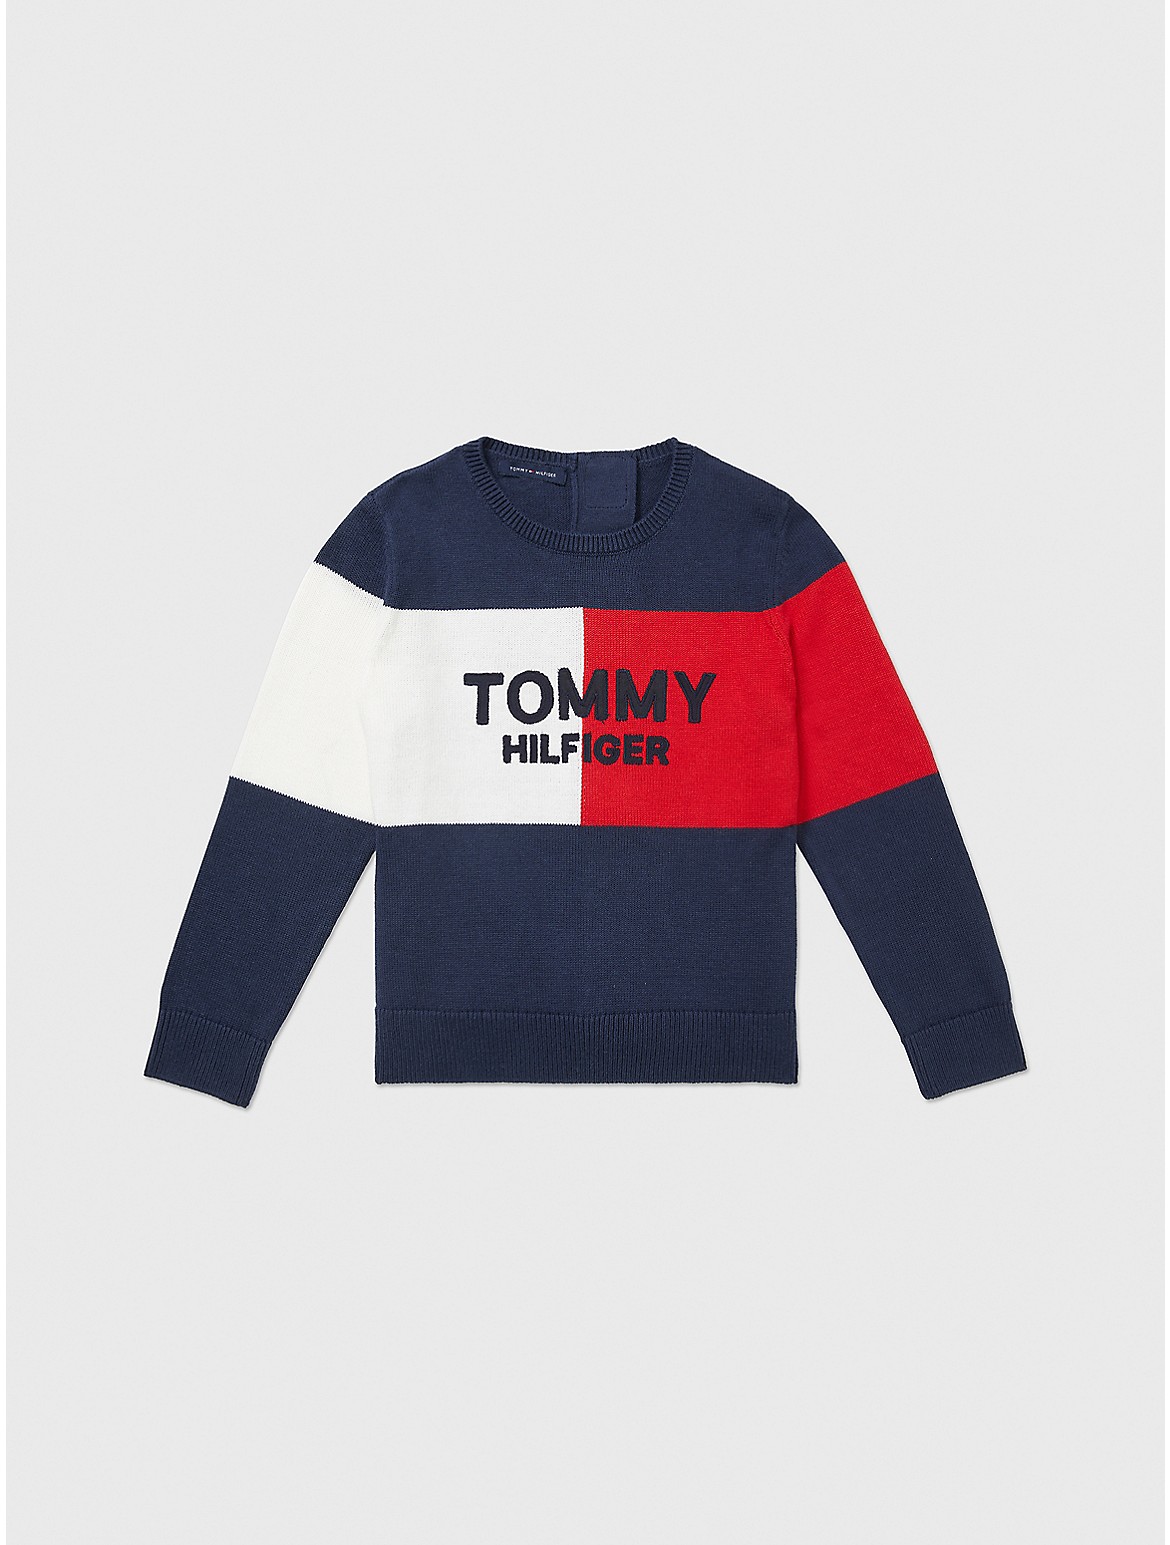 Tommy Hilfiger Boys' Kids' Seated Fit Flag Sweater